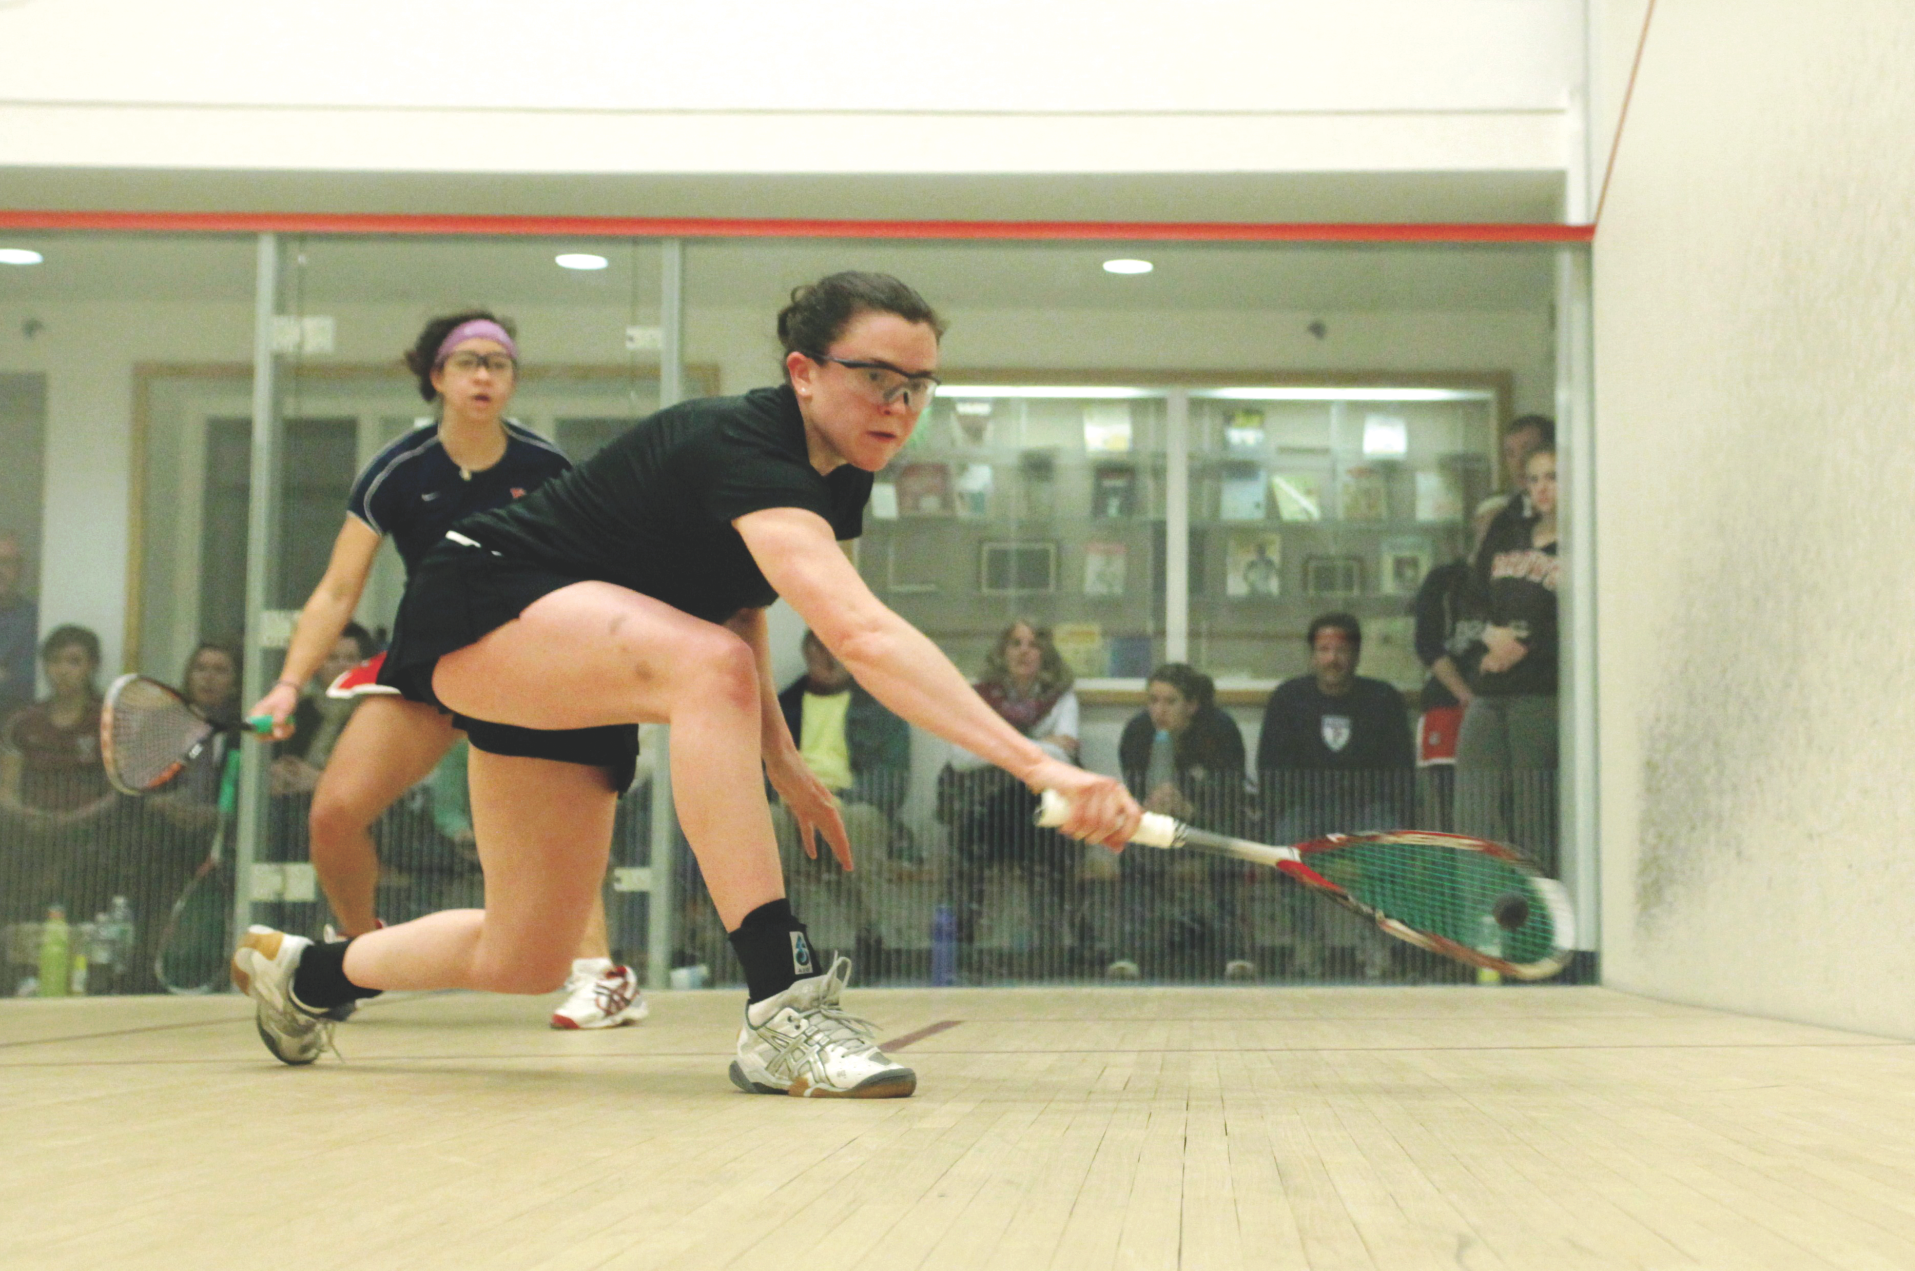 In the Howe Cup championship match featuring Harvard and Penn, Harvard’s Katherine O’Donnell (Opposite) jumped to an early two game lead over Penn’s Christina Matthias at the No. 8 position and then survived a torrid comeback by Matthias to clinch Harvard’s first Howe Cup since 2001. 